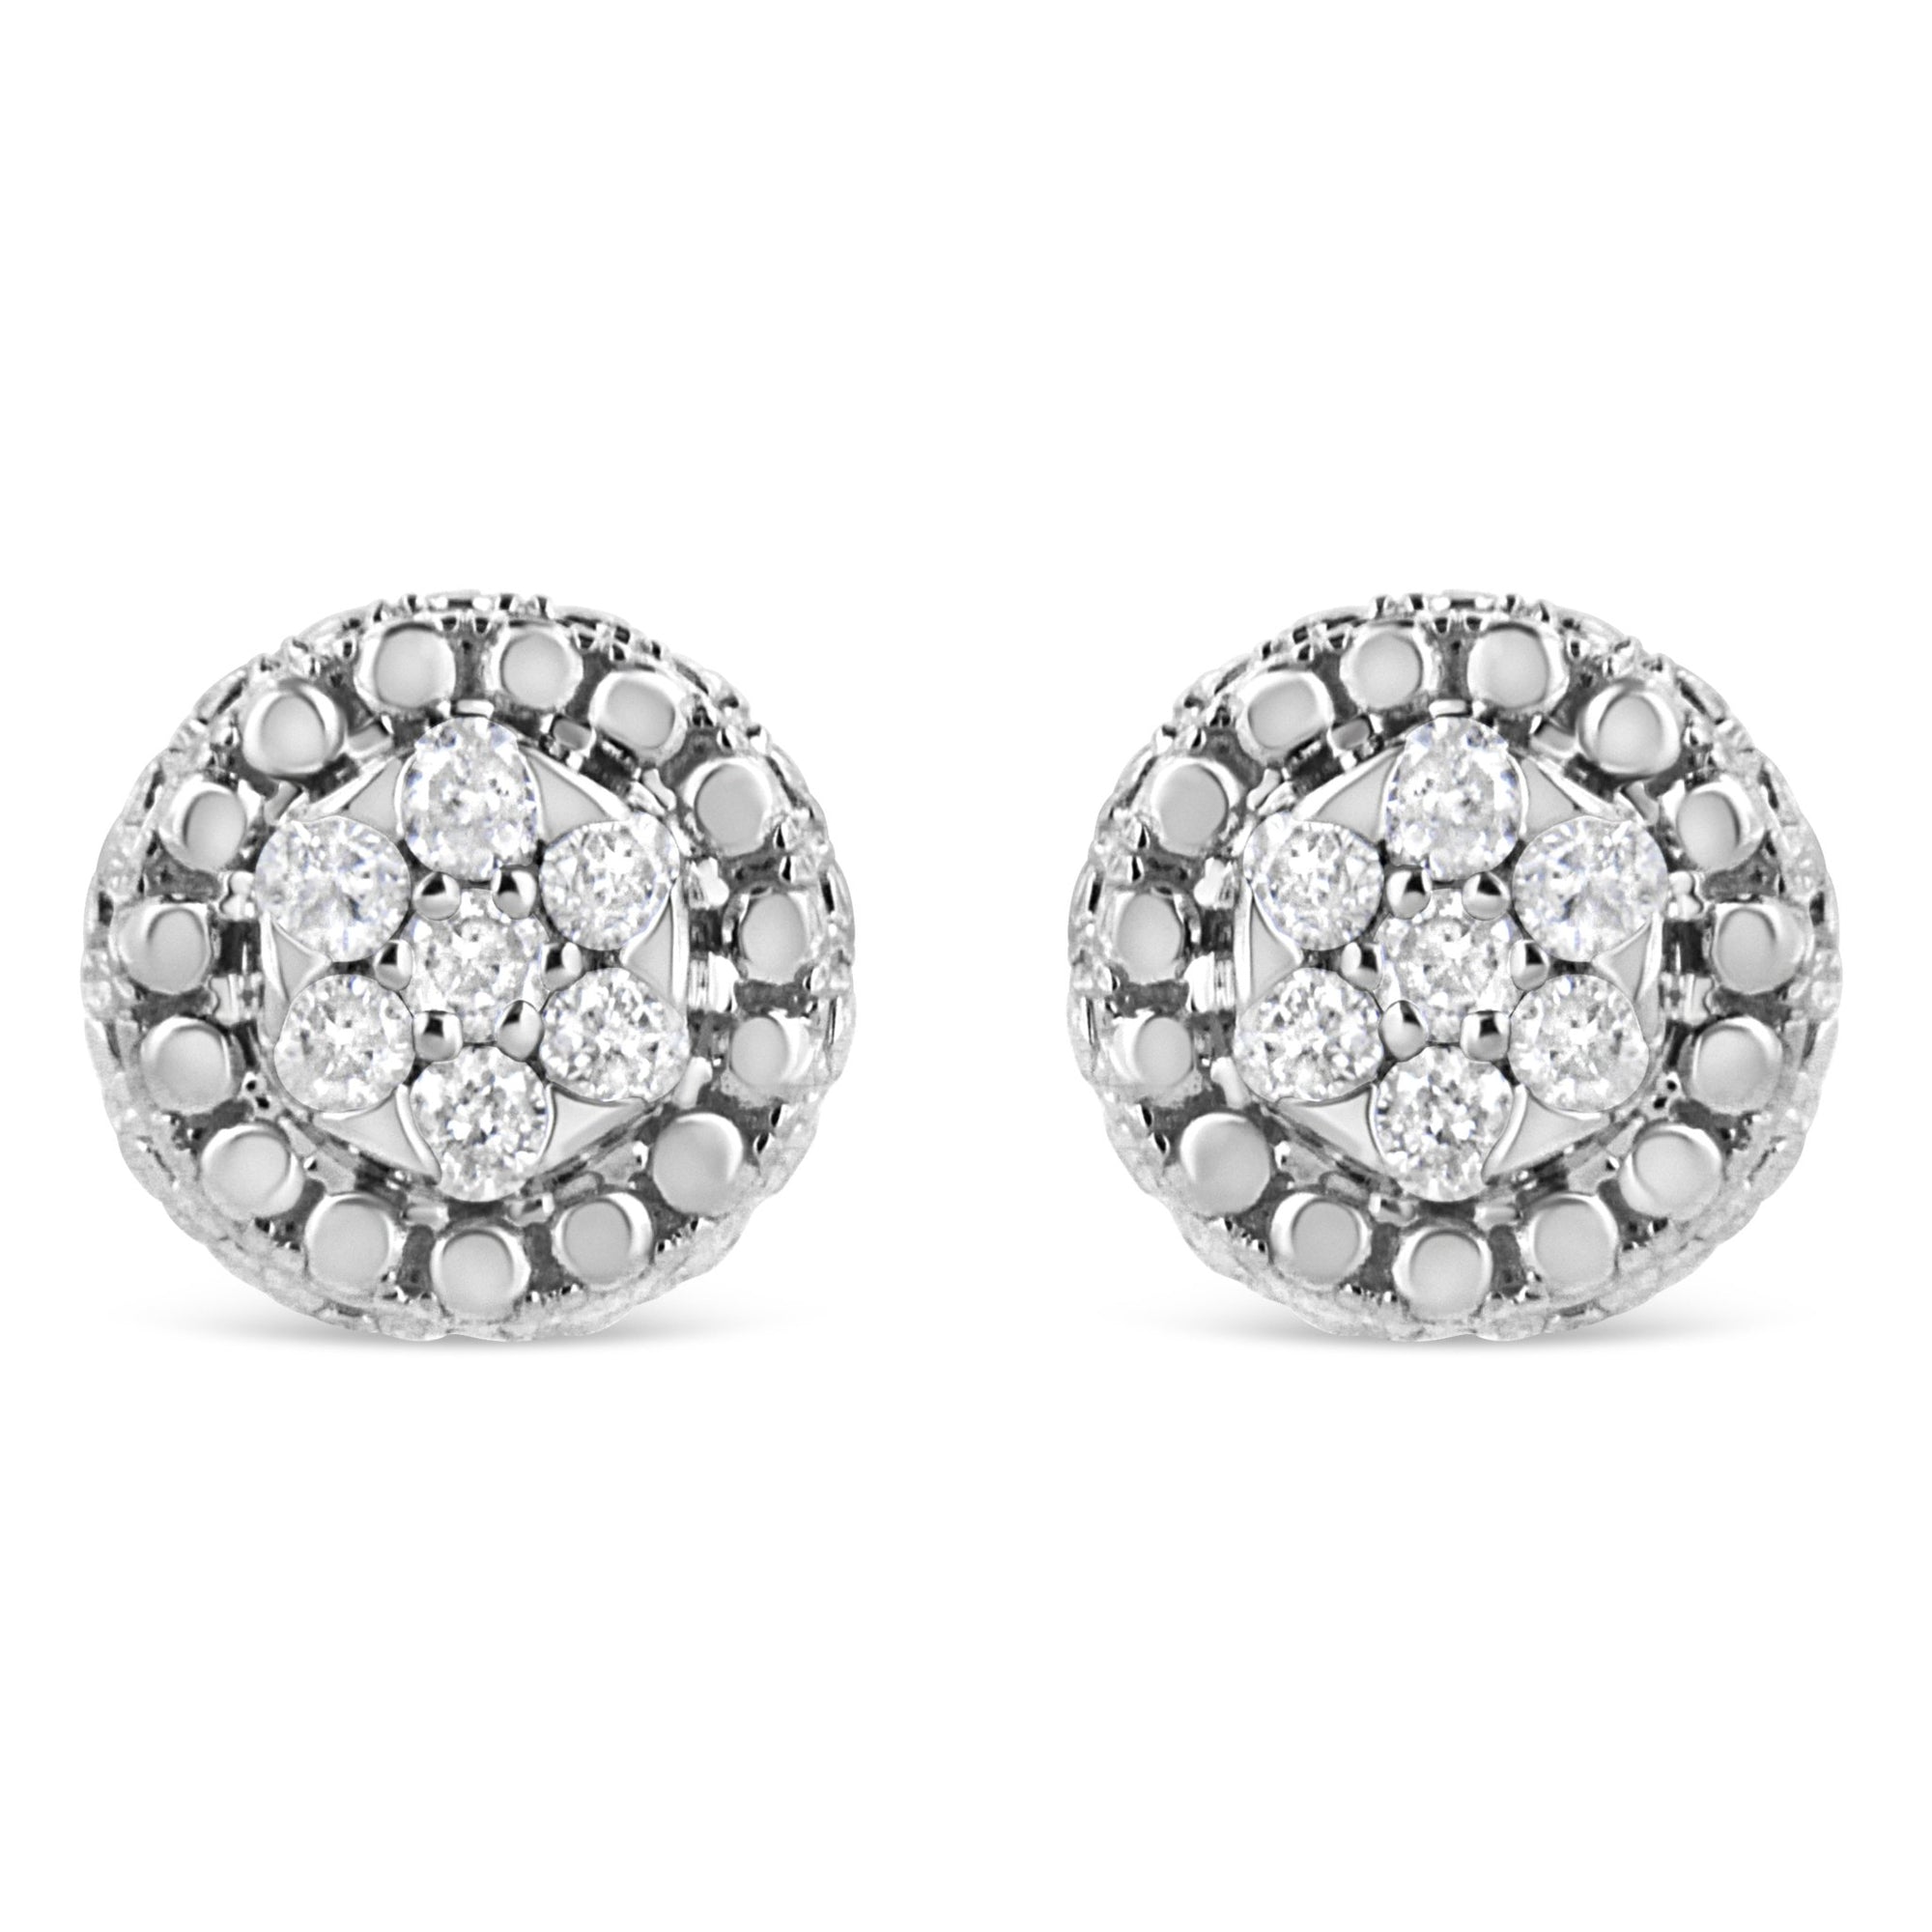 .925 Sterling Silver 1/3 Cttw 7 Stone Pave Set Diamond Beaded Stud Earrings (I-J Color, I2-I3 Clarity) - LinkagejewelrydesignLinkagejewelrydesign